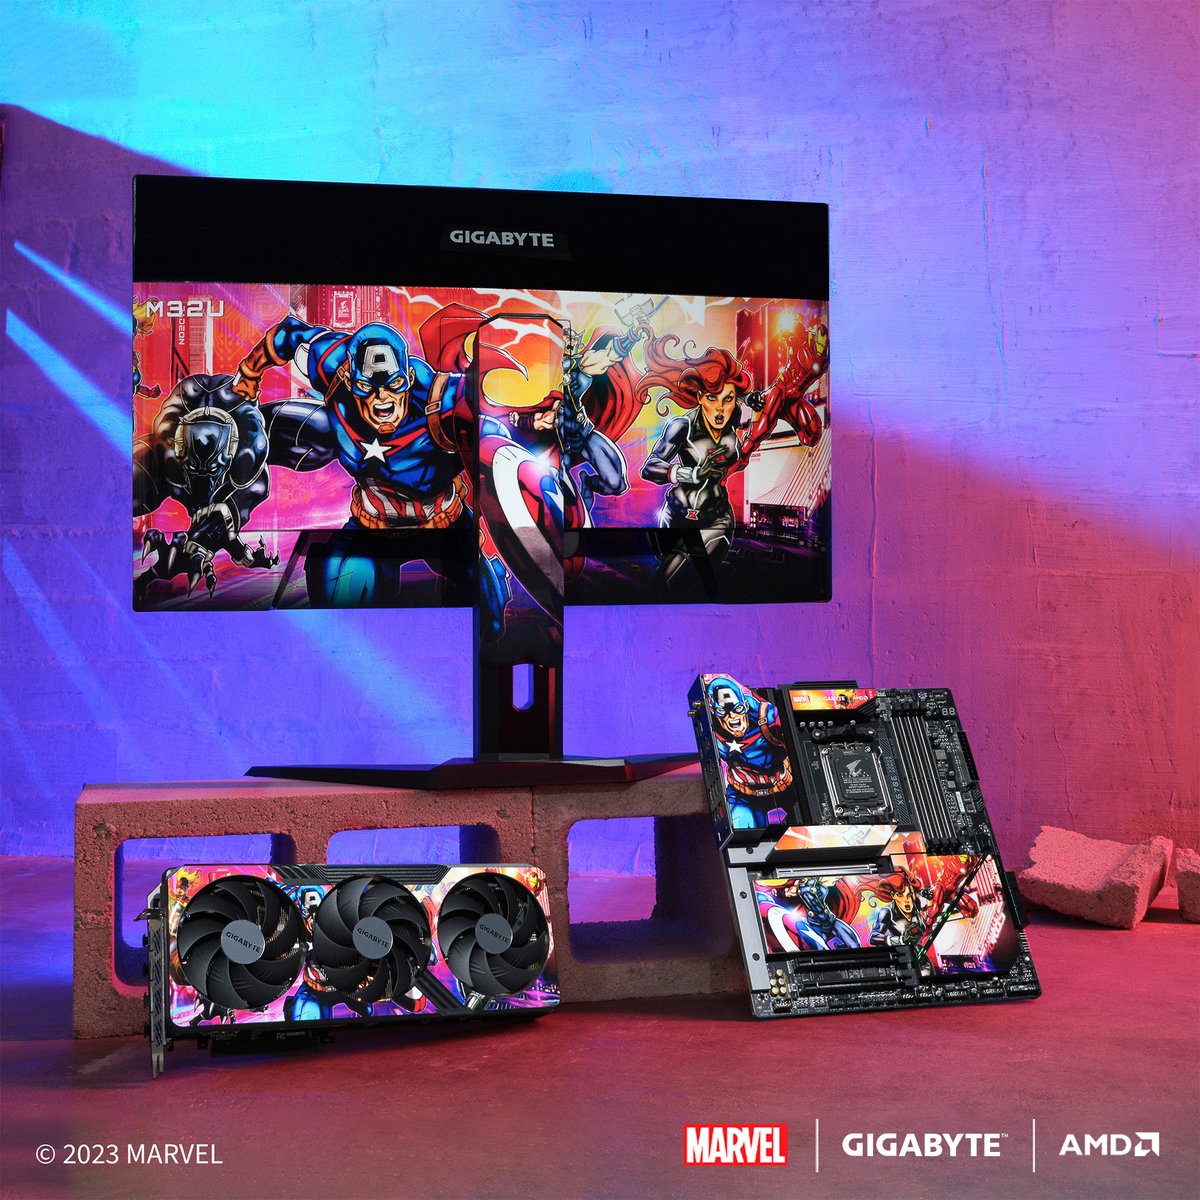 Avengers coming... Who's your @Marvel hero? #AORUSUnleashed @AMDGaming 

Enter to win this custom @AMDRyzen X670E motherboard, @amdradeon RX 7900 XTX graphics card, and monitor set: gigabyte.com/us/aorus-unlea…